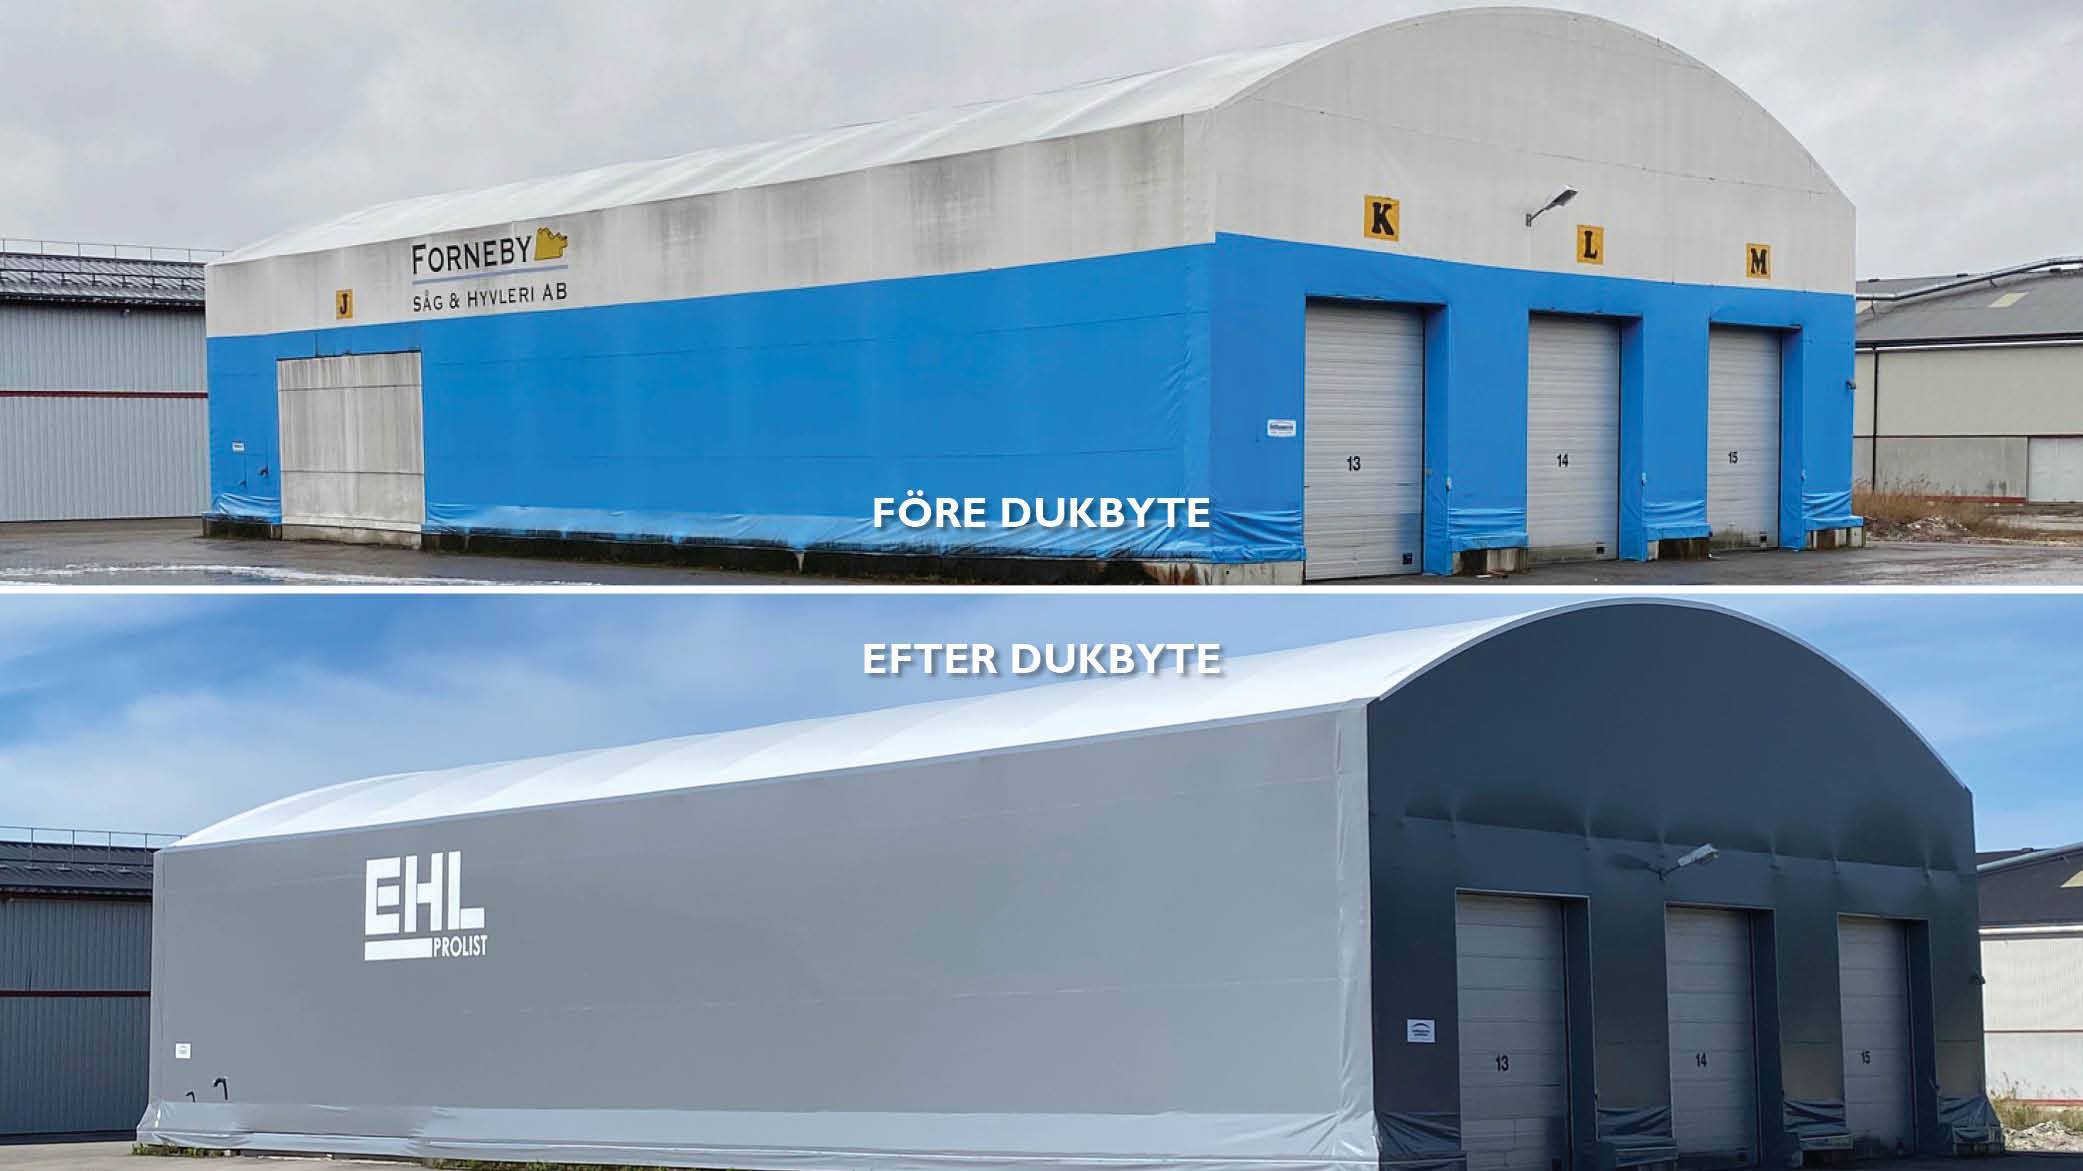 Canvas replacement at EHL Prolist in Möklinta. Picture with two fabric structures, one before and one after the canvas replacement